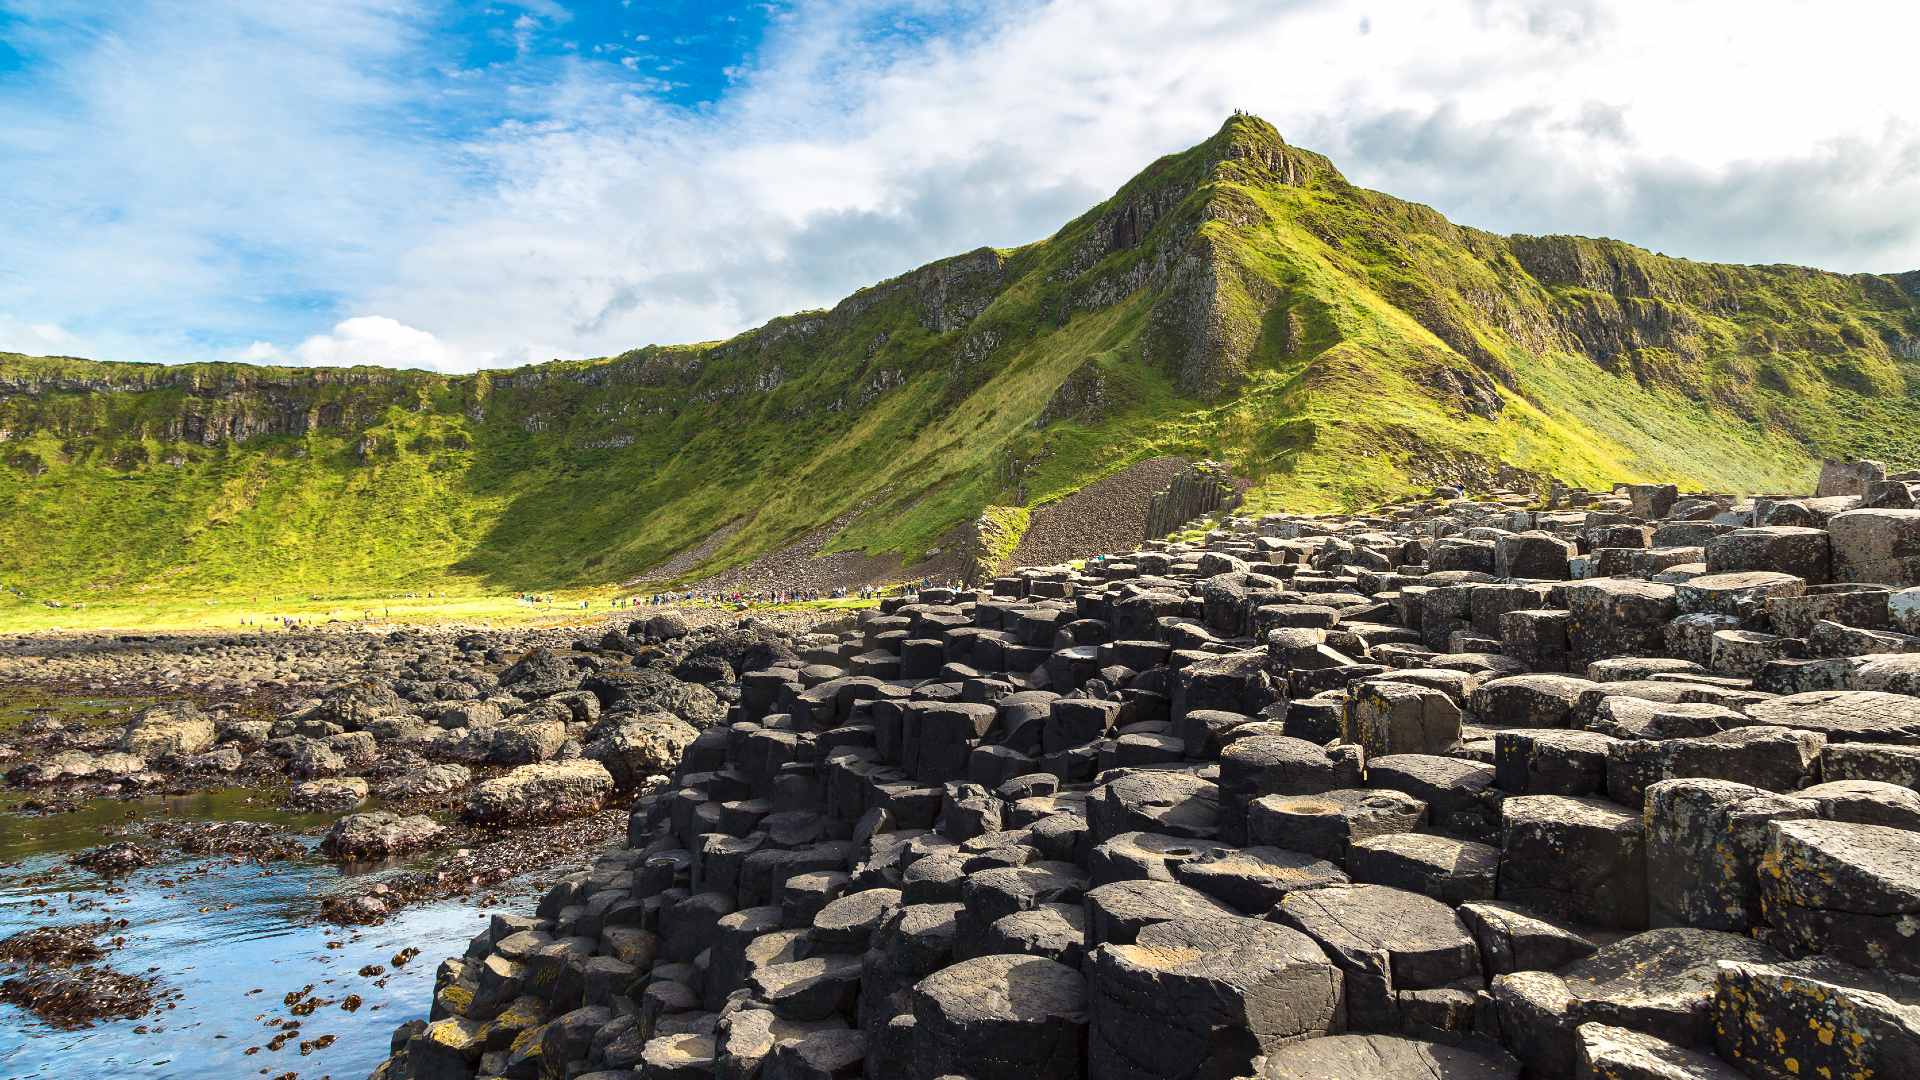 Shoreline view of the Giants Causeway and towering sea cliff in Northern Ireland